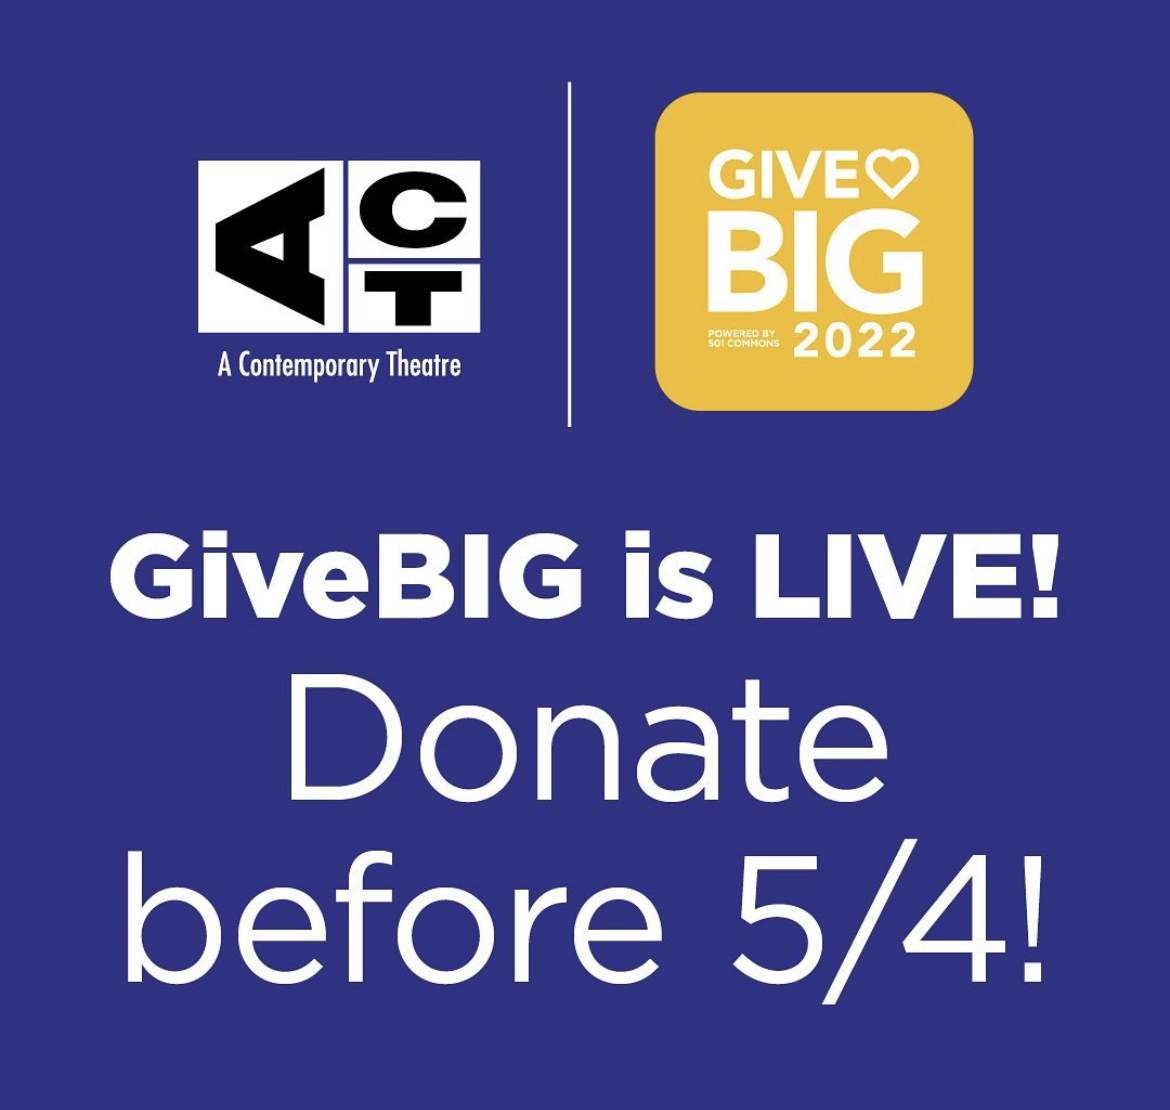 Support #ACT this #GiveBig and invest in bold new works. ACT is a 501(c)(3) organization working in service of contemporary theatre, new works and local artists. We would love your support! Thank you. tinyurl.com/givebigACT